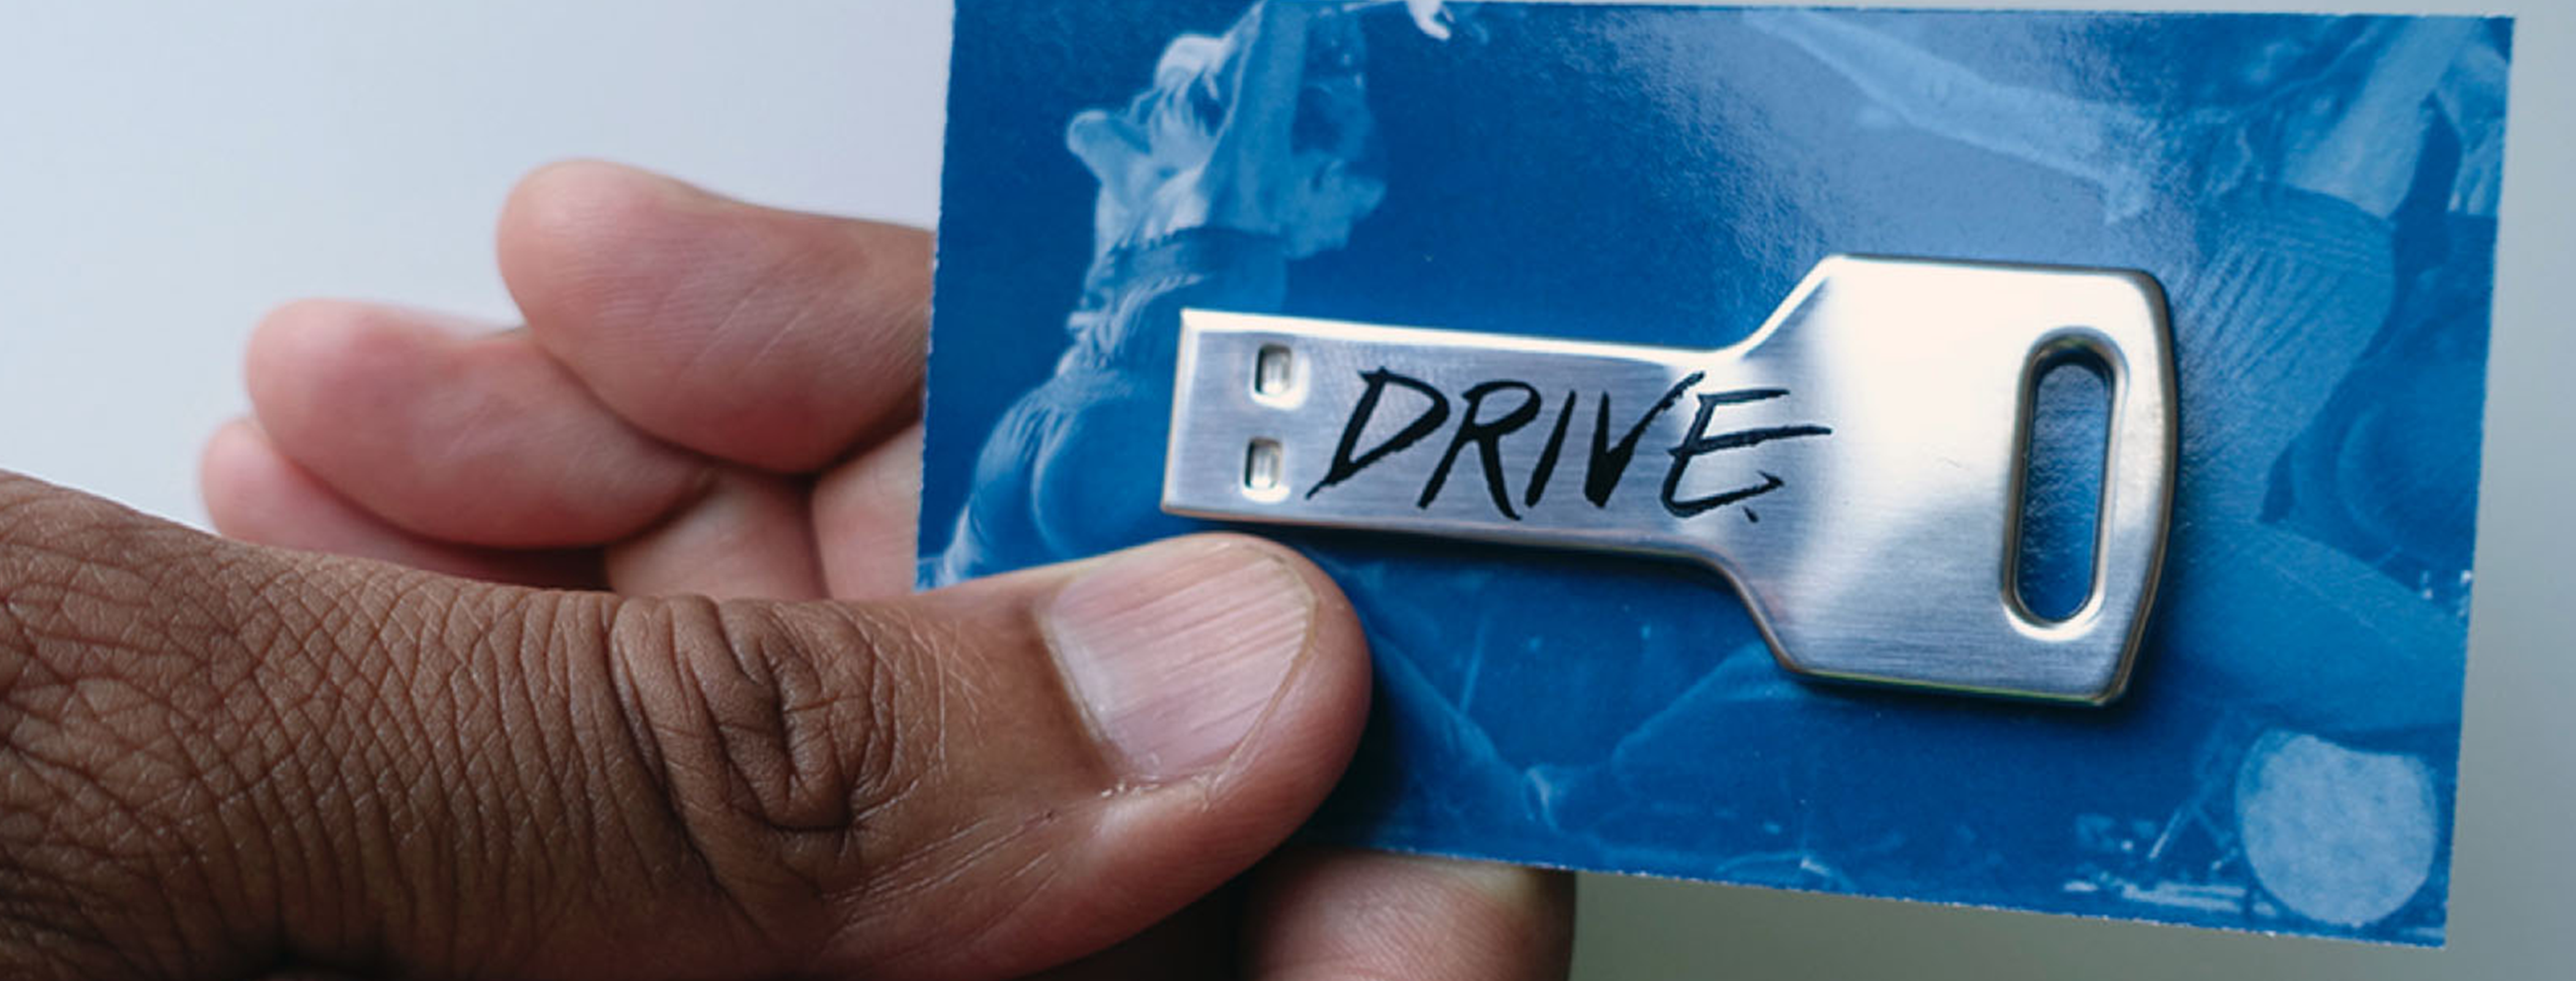 a medium-skinned hand holds a blue card which has a silver key-shaped USB drive attached to it. the USB says the word "DRIVE" in aggressive font. the blue card is a duotone photo of dancers in evocative poses.